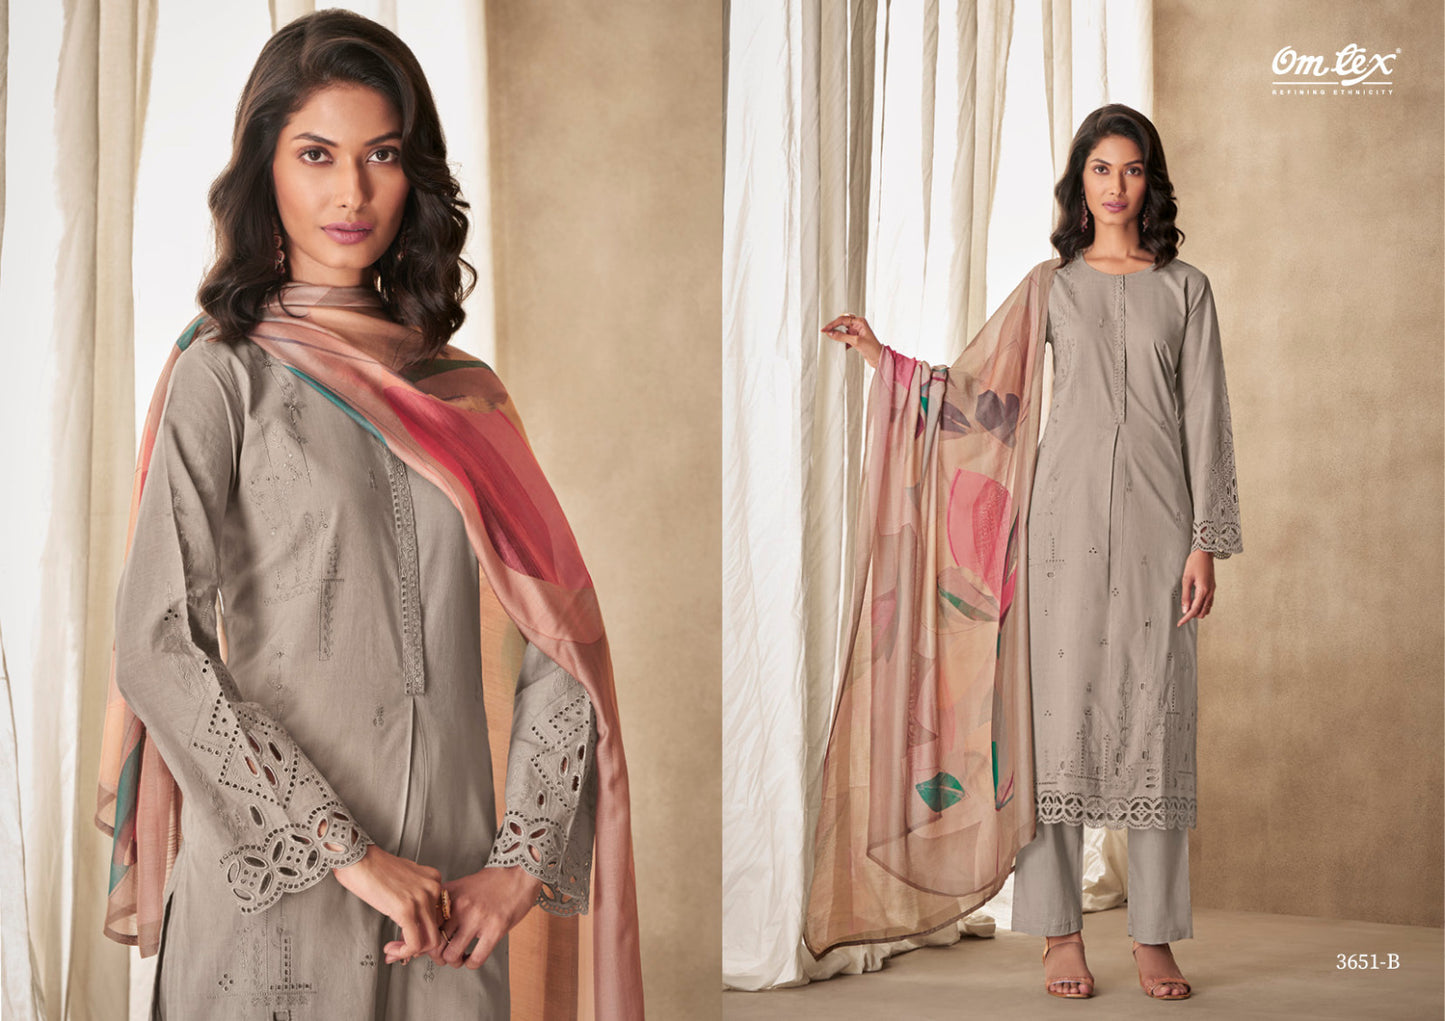 Uma Omtex Lawn Cotton Plazzo Style Suits